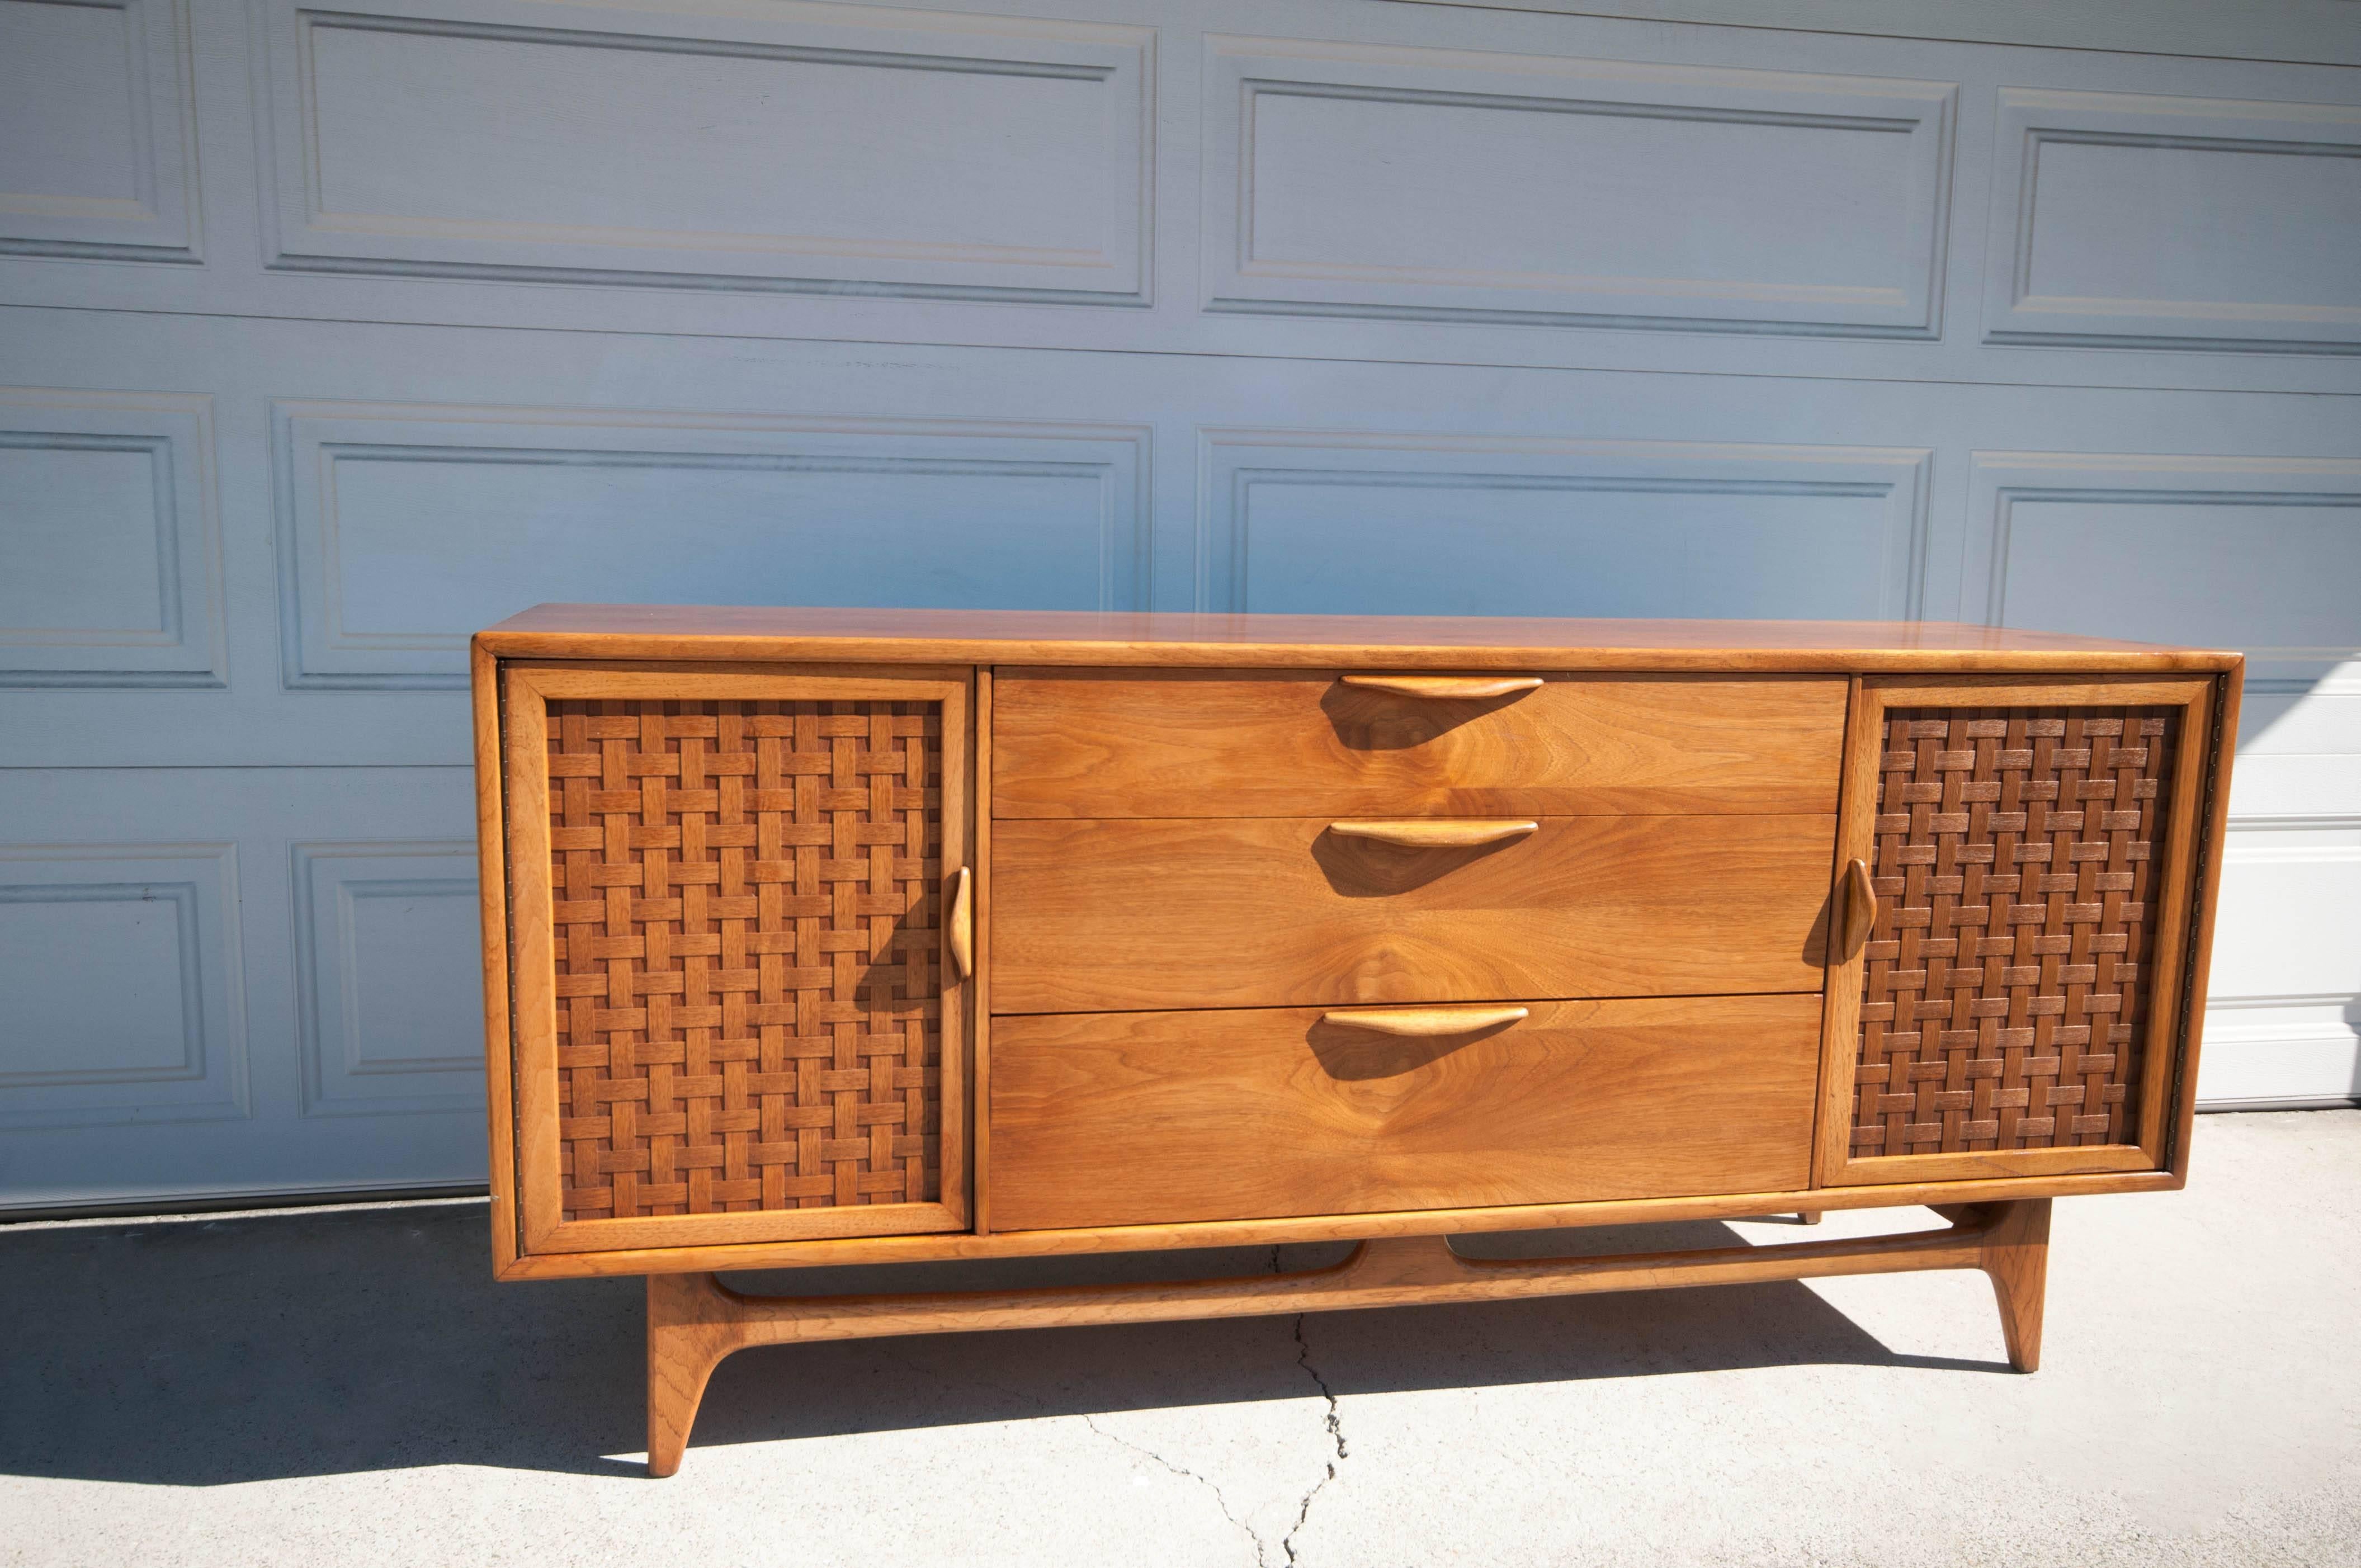 Mid Century Lane Perception Credenza in walnut and oak. This piece features three large dovetailed drawers with sculpted pulls. Signature basketweave doors reveal one fixed shelf and a drawers for each side. It is in great condition with minimal